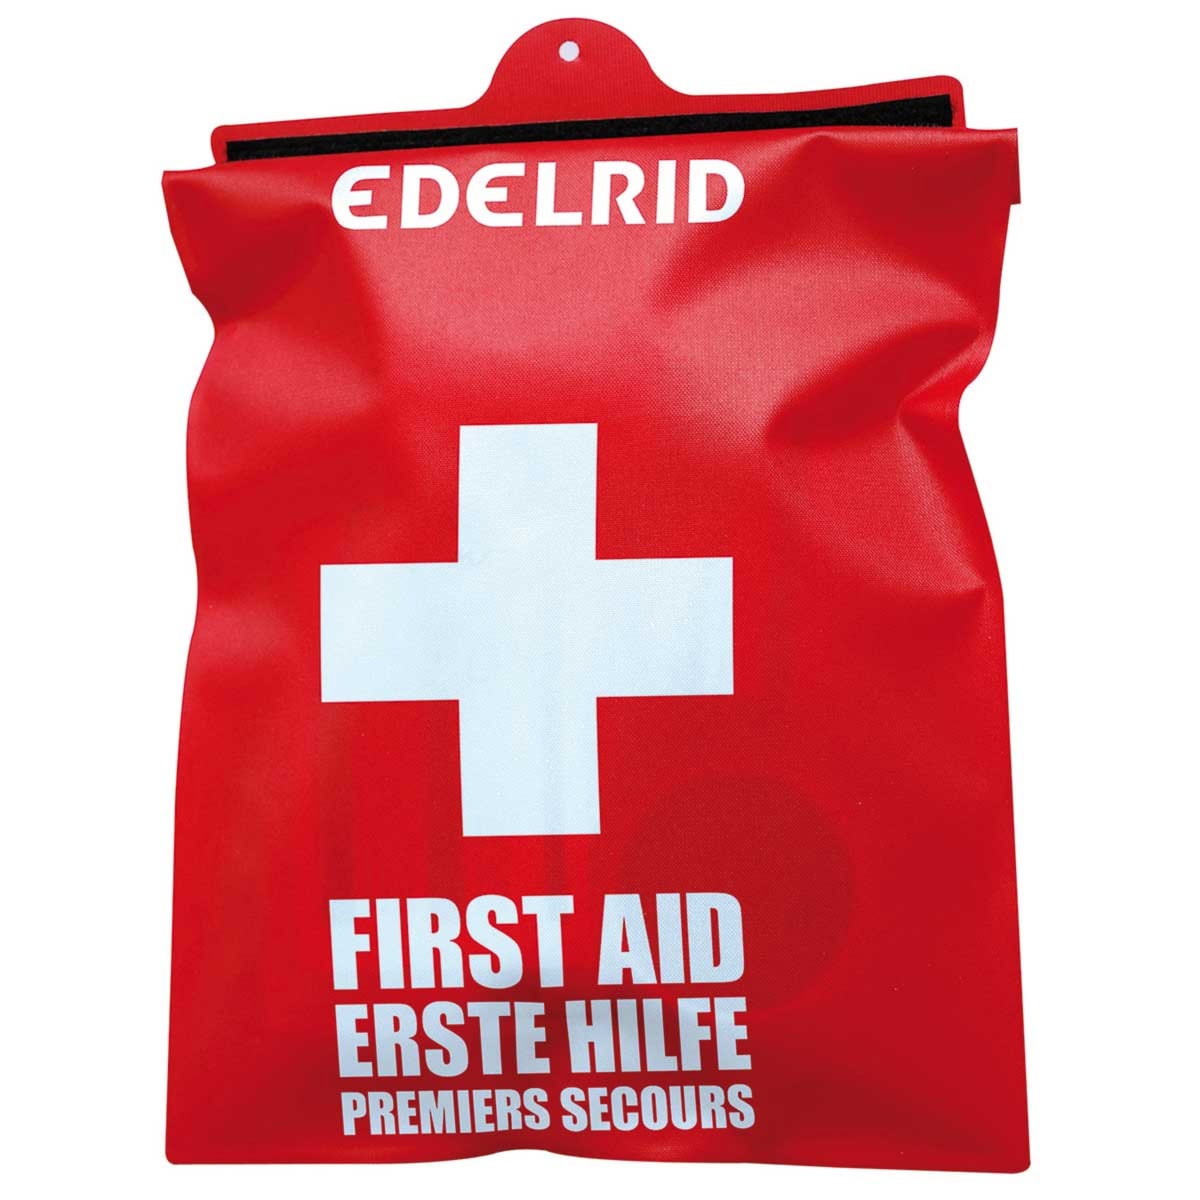 Edelrid First Aid Kit Hike